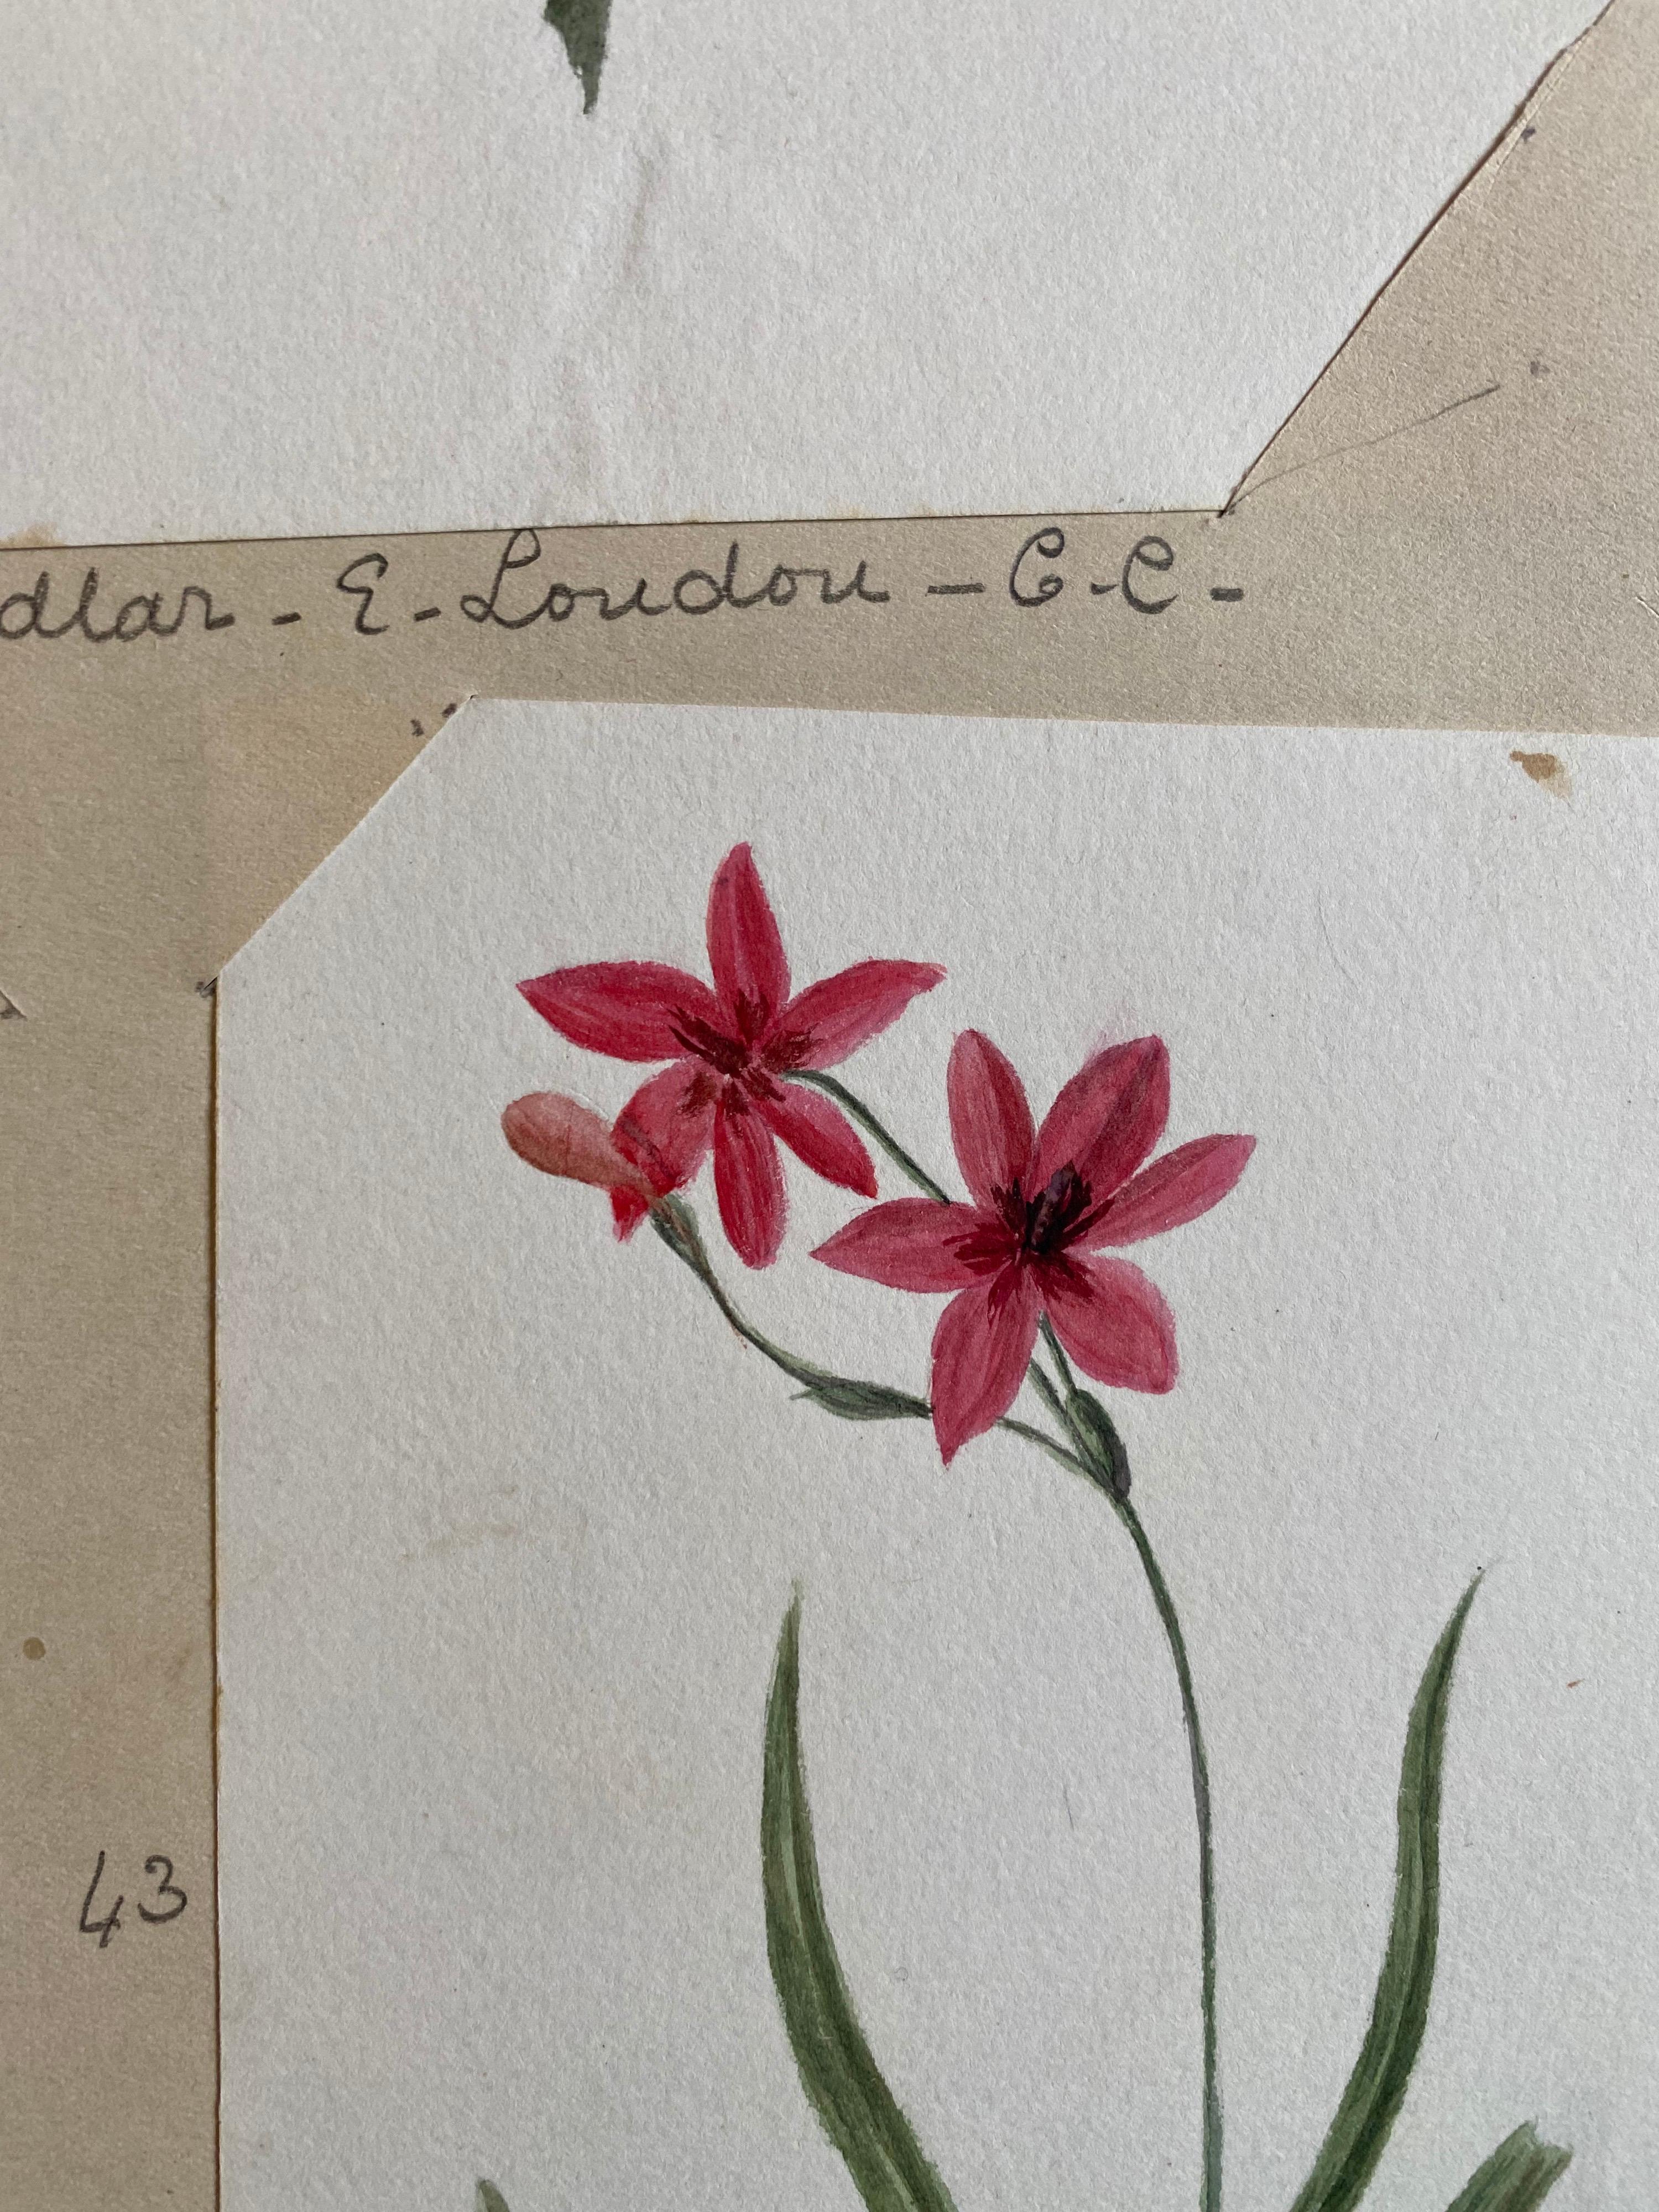 Two very fine original antique English botanical watercolour paintings depicting this beautiful depiction of a flower/ plant. The work came to us from a private collection in Surrey, England and had been part of an album of works assembled by the